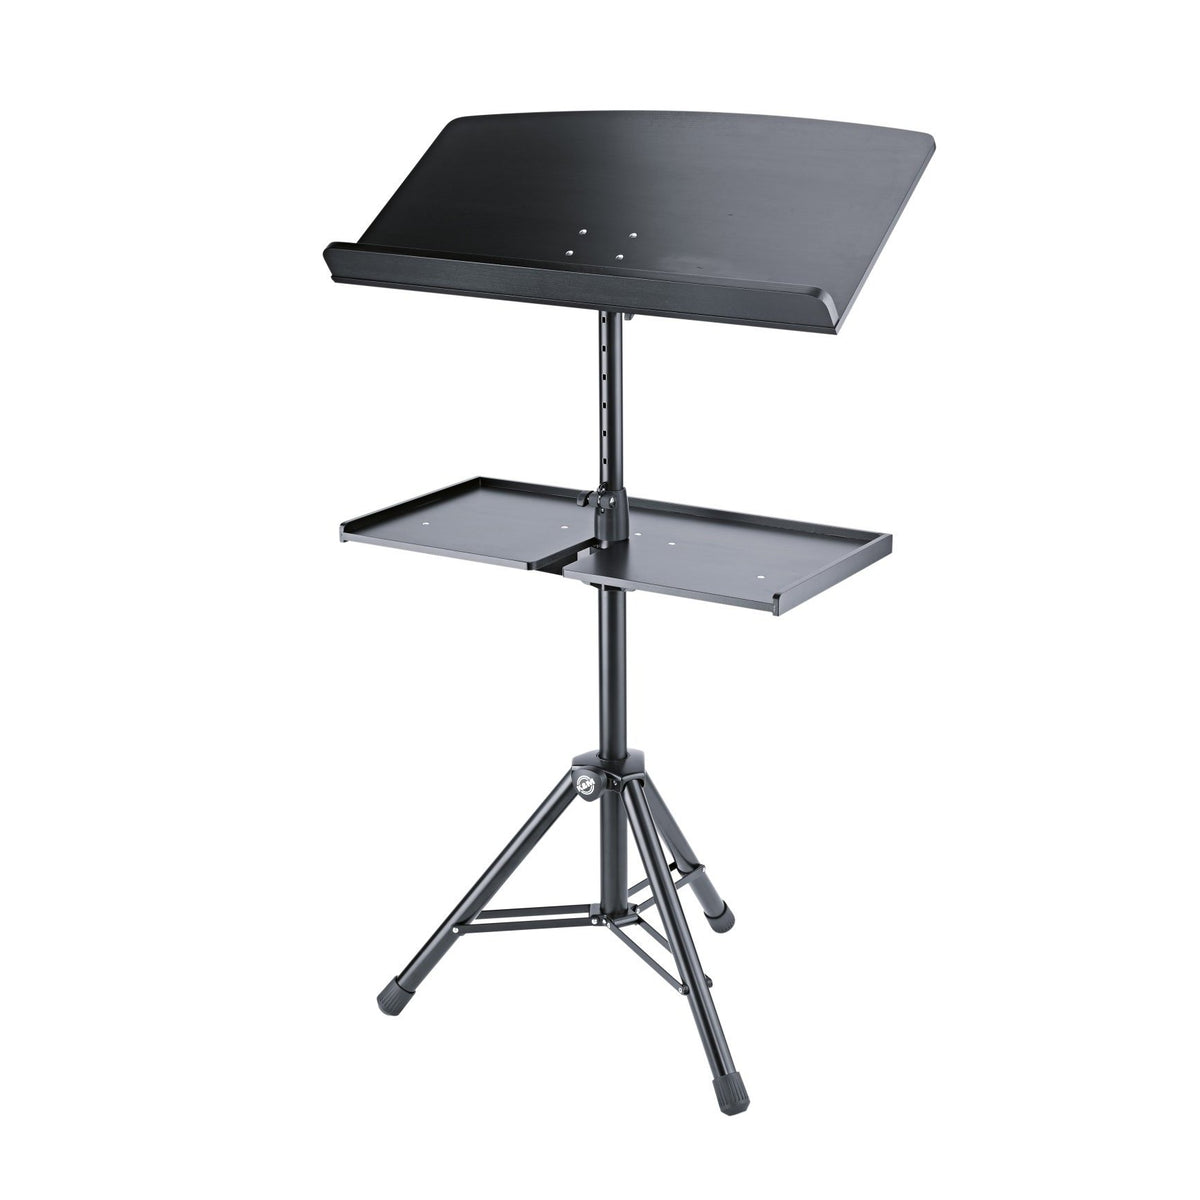 KÃ¶nig &amp; Meyer - 12331 Orchestra Conductor Stand Base-Music Stand-KÃ¶nig &amp; Meyer-Music Elements